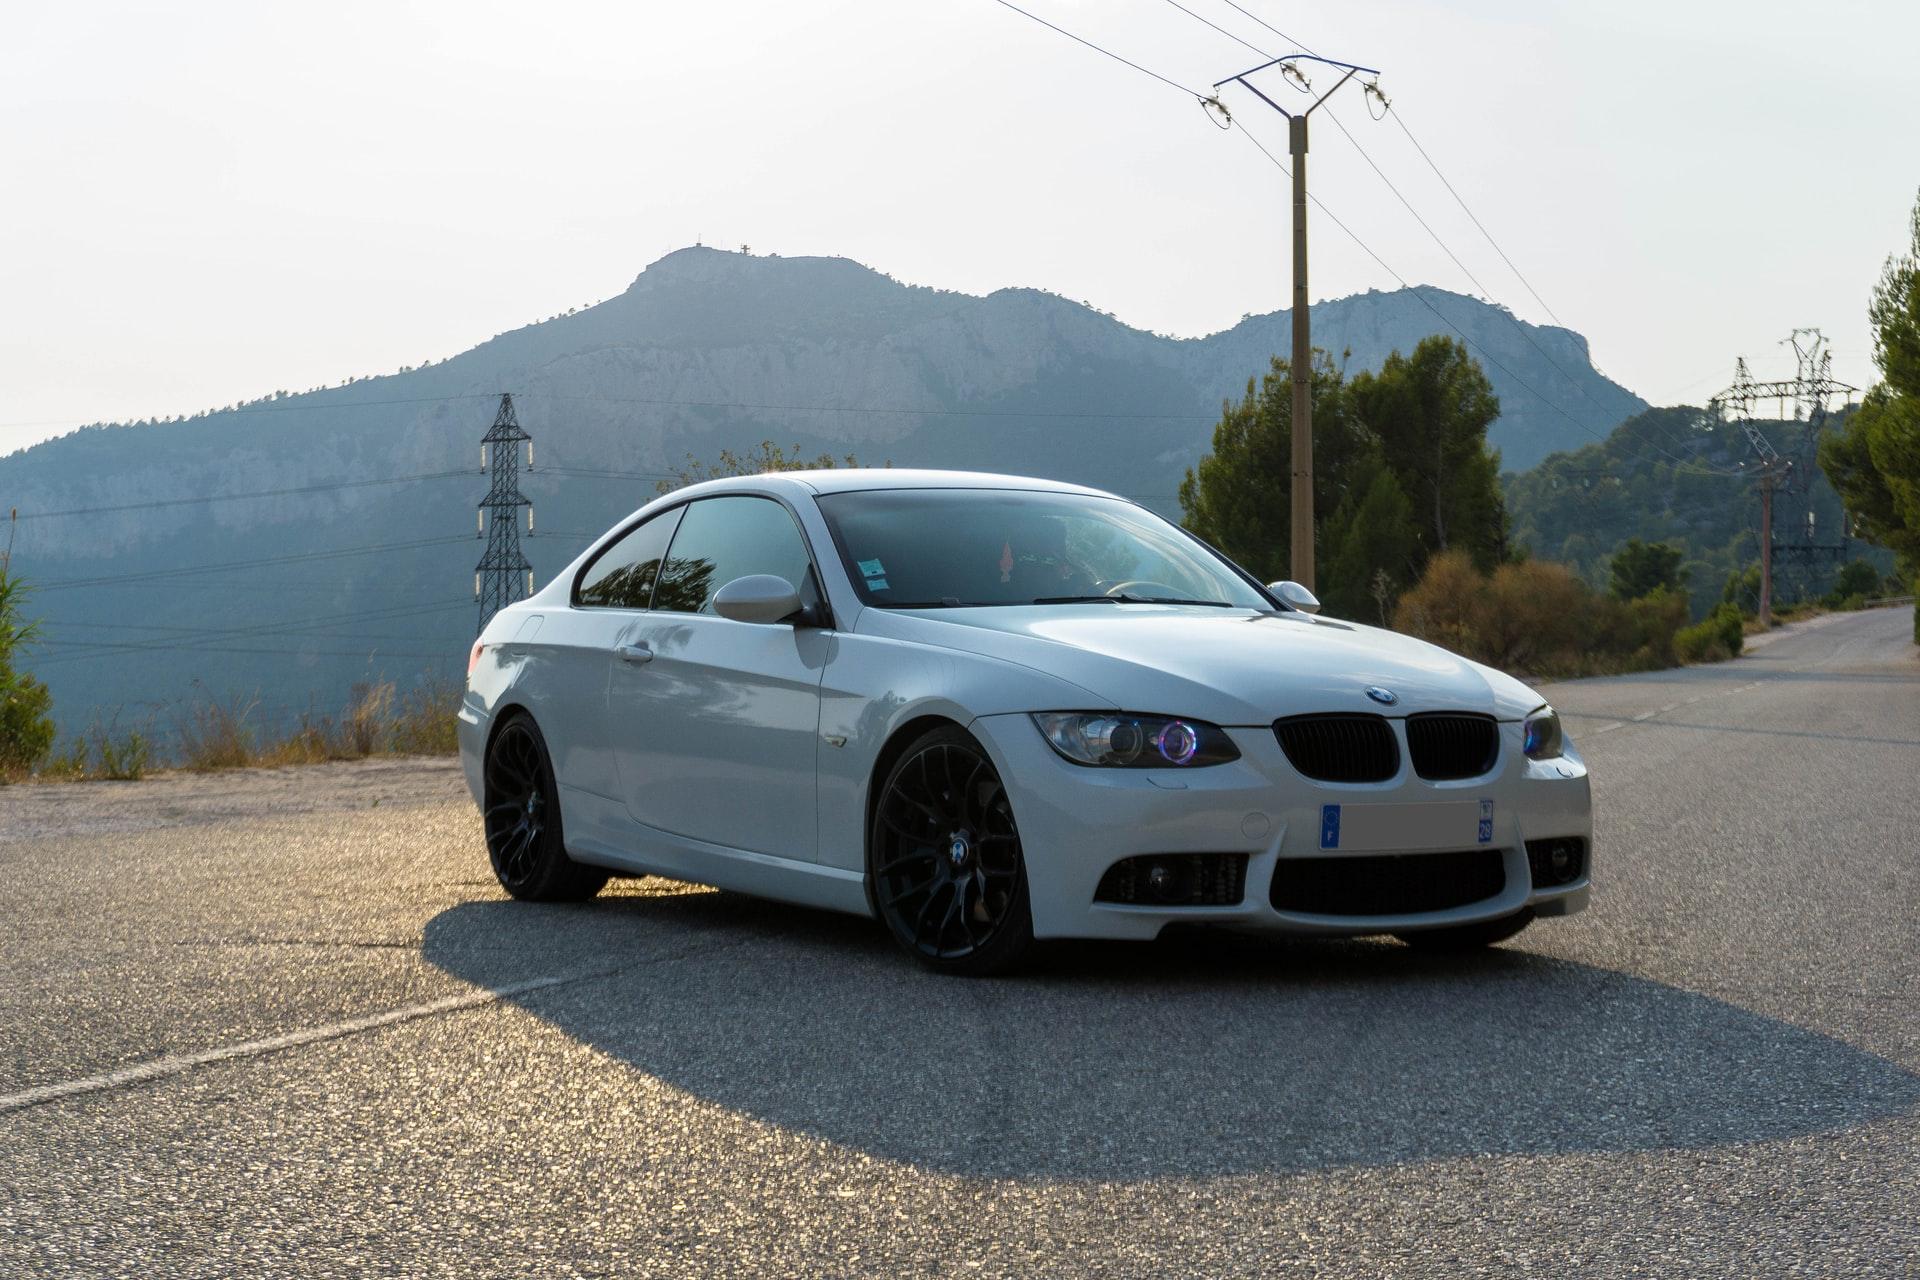 The 335i was the first of the 3 series to have a turbocharged engine upon its release.